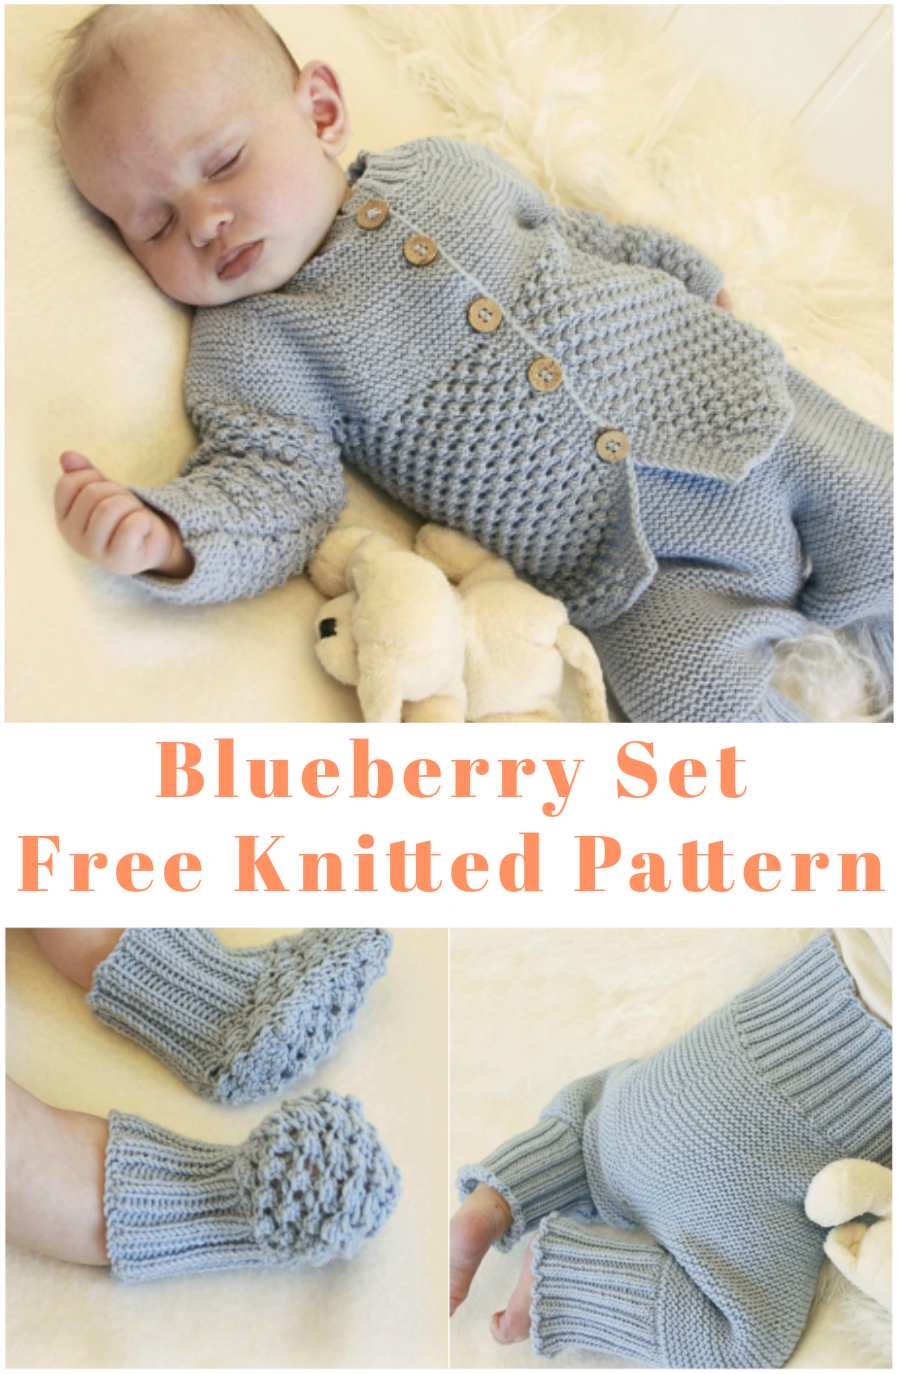 Free Knitting Patterns For Childrens Jackets Blueberry Set Of Socks Pants And Jacket Styles Idea